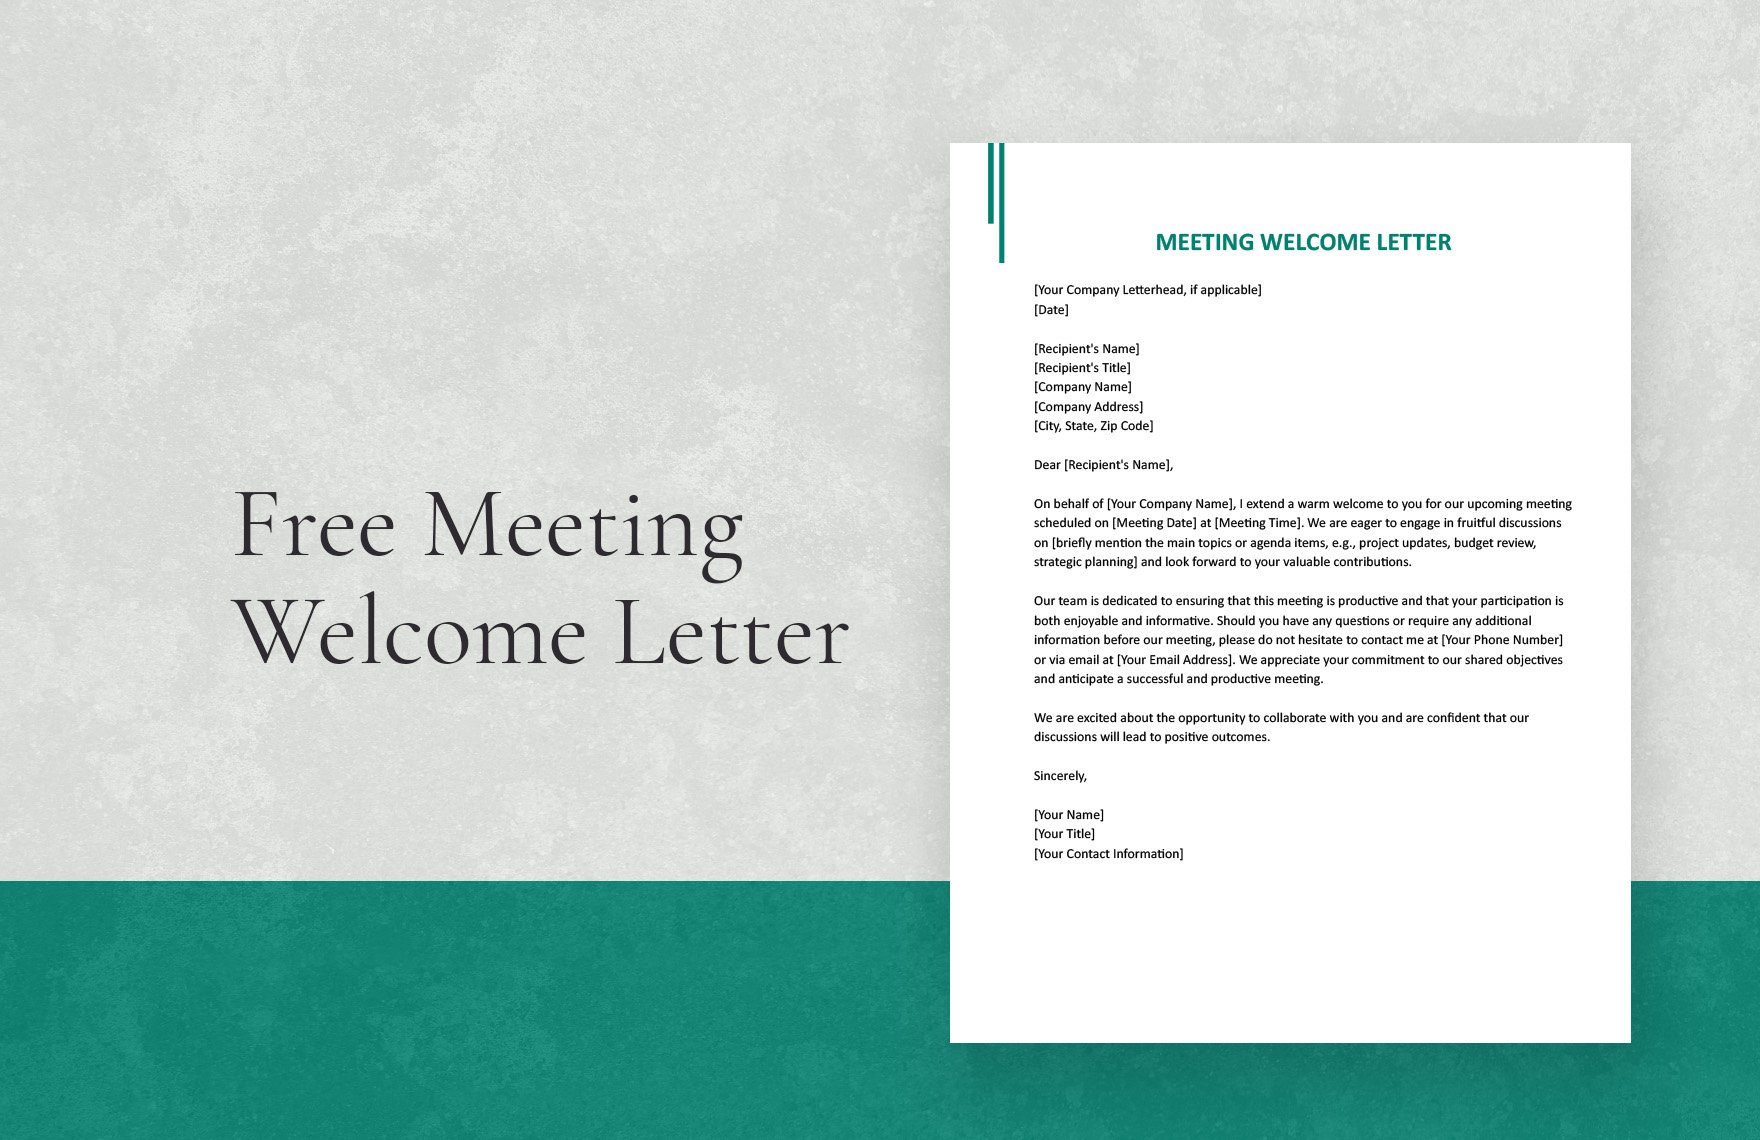 Free Meeting Welcome Letter